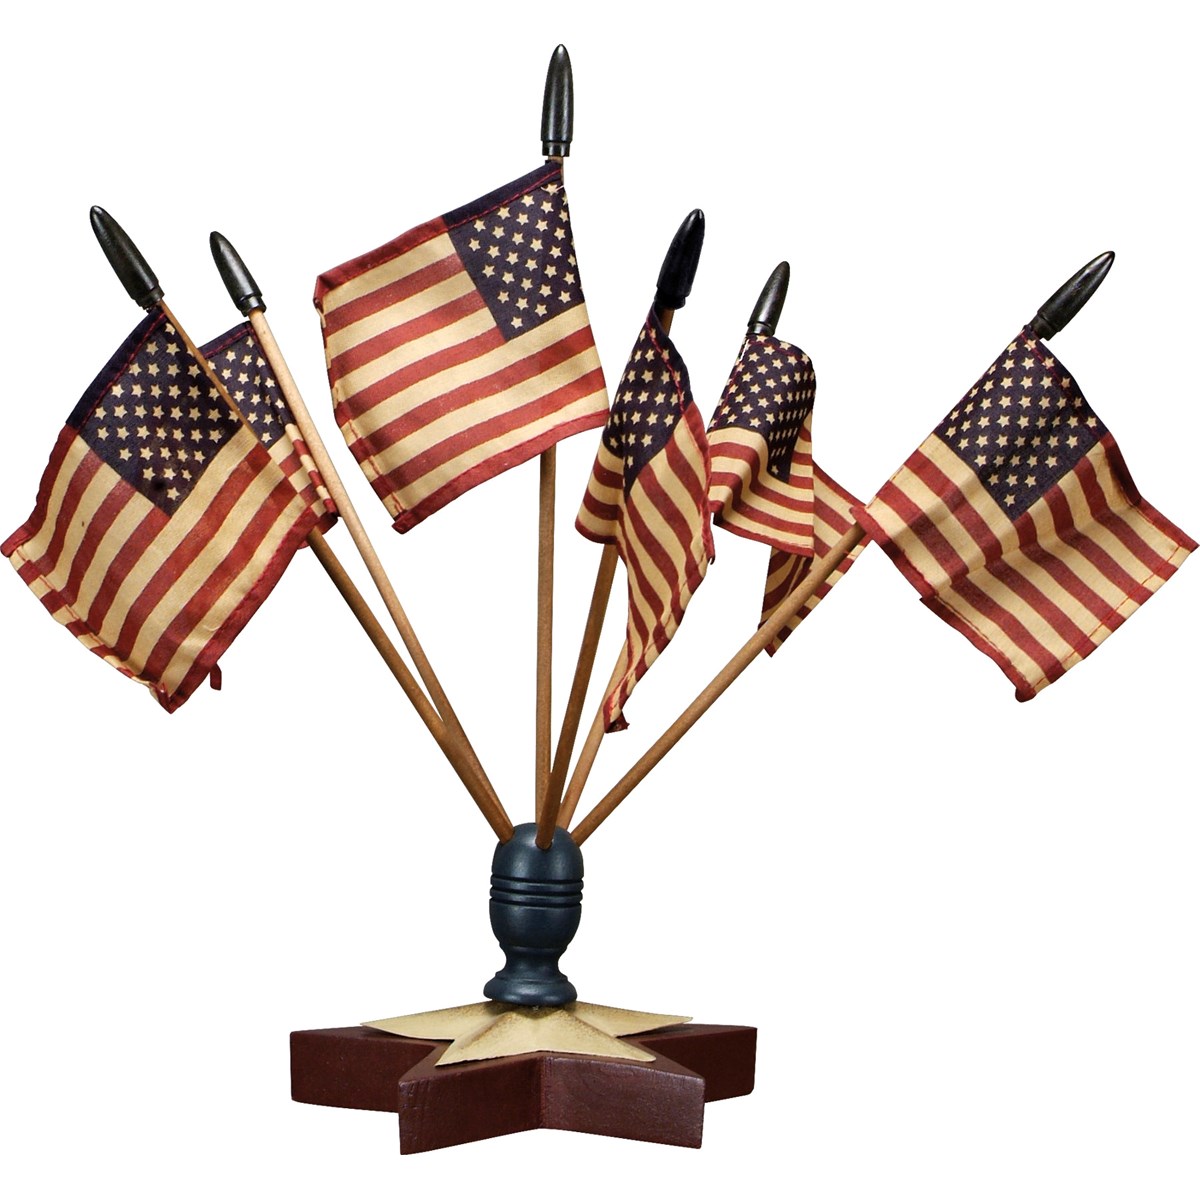 Star Flag Finial With Flags - Flag: 5.25" x 3.50", Stick: 11.25", Base: 6.50" Diameter x 4" - Wood, Metal, Fabric